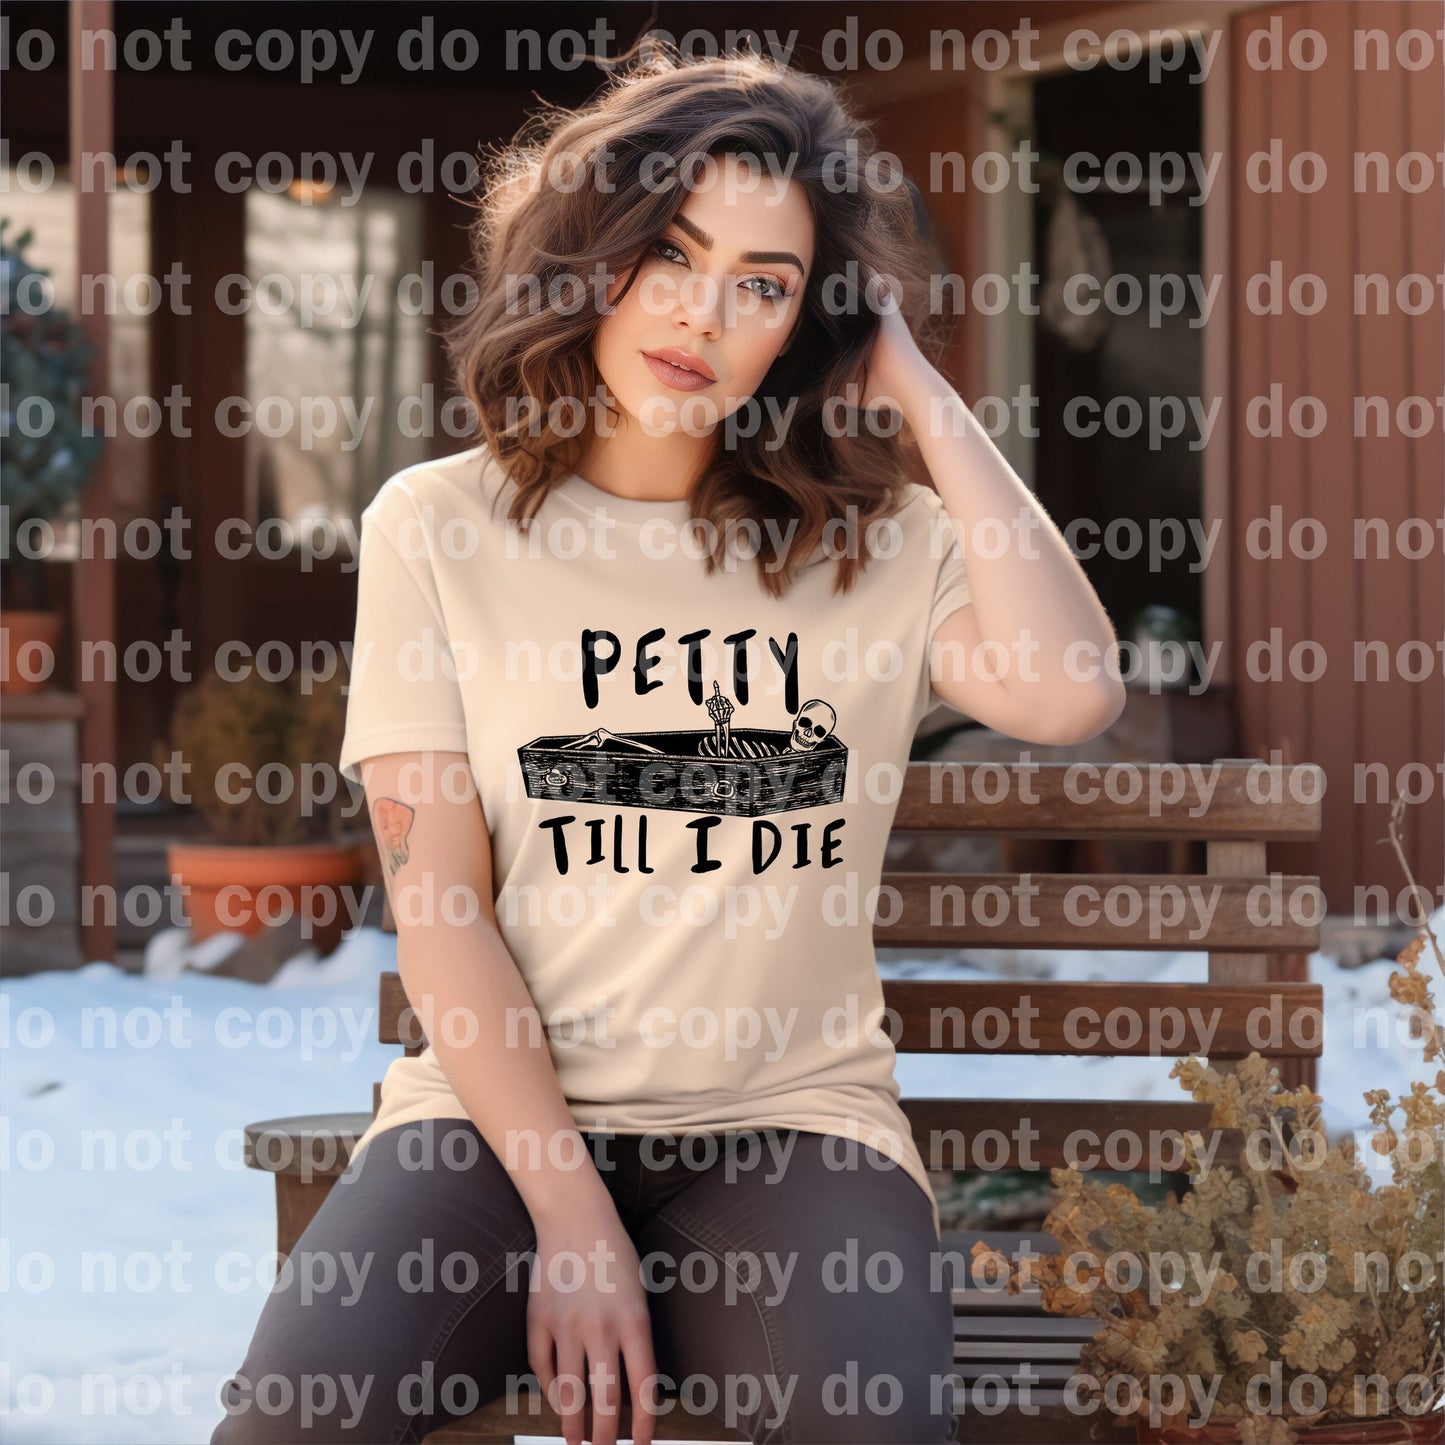 Petty Till I Die Coffin Skellie Distressed/Non Distressed Dream Print or Sublimation Print